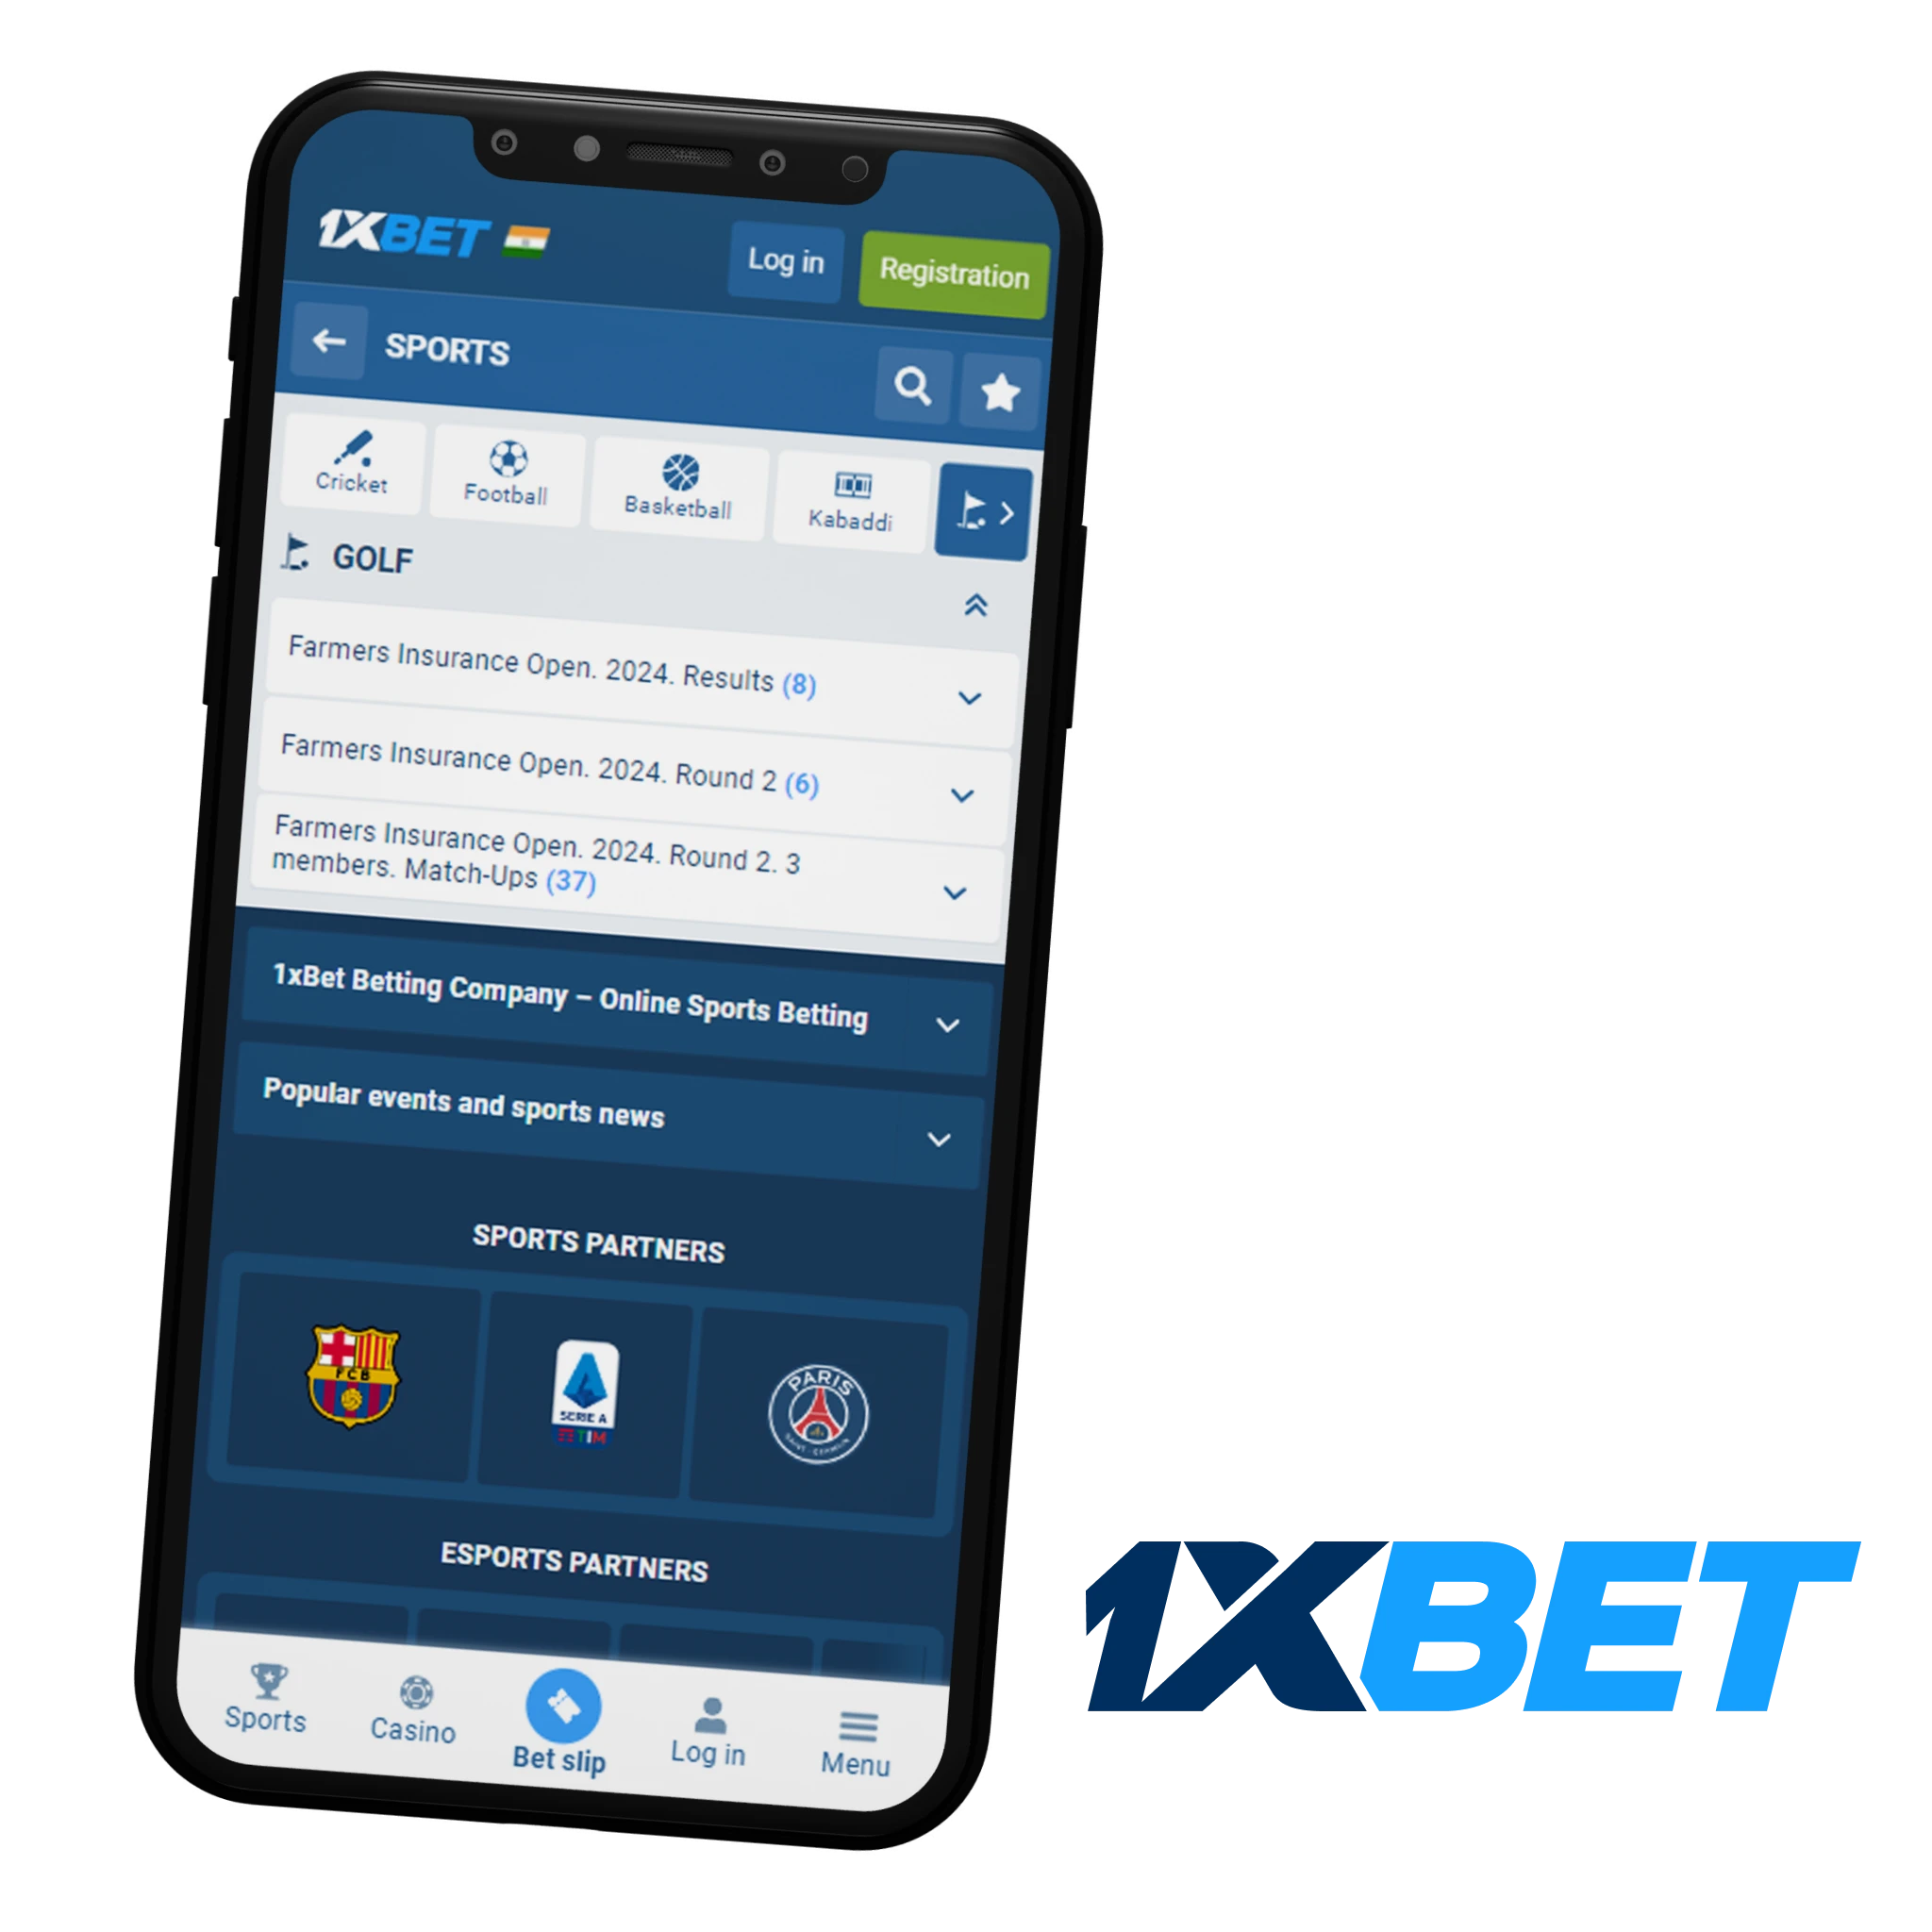 1xbet app opens doors to numerous opportunities for engaging with your golf matches for betting.